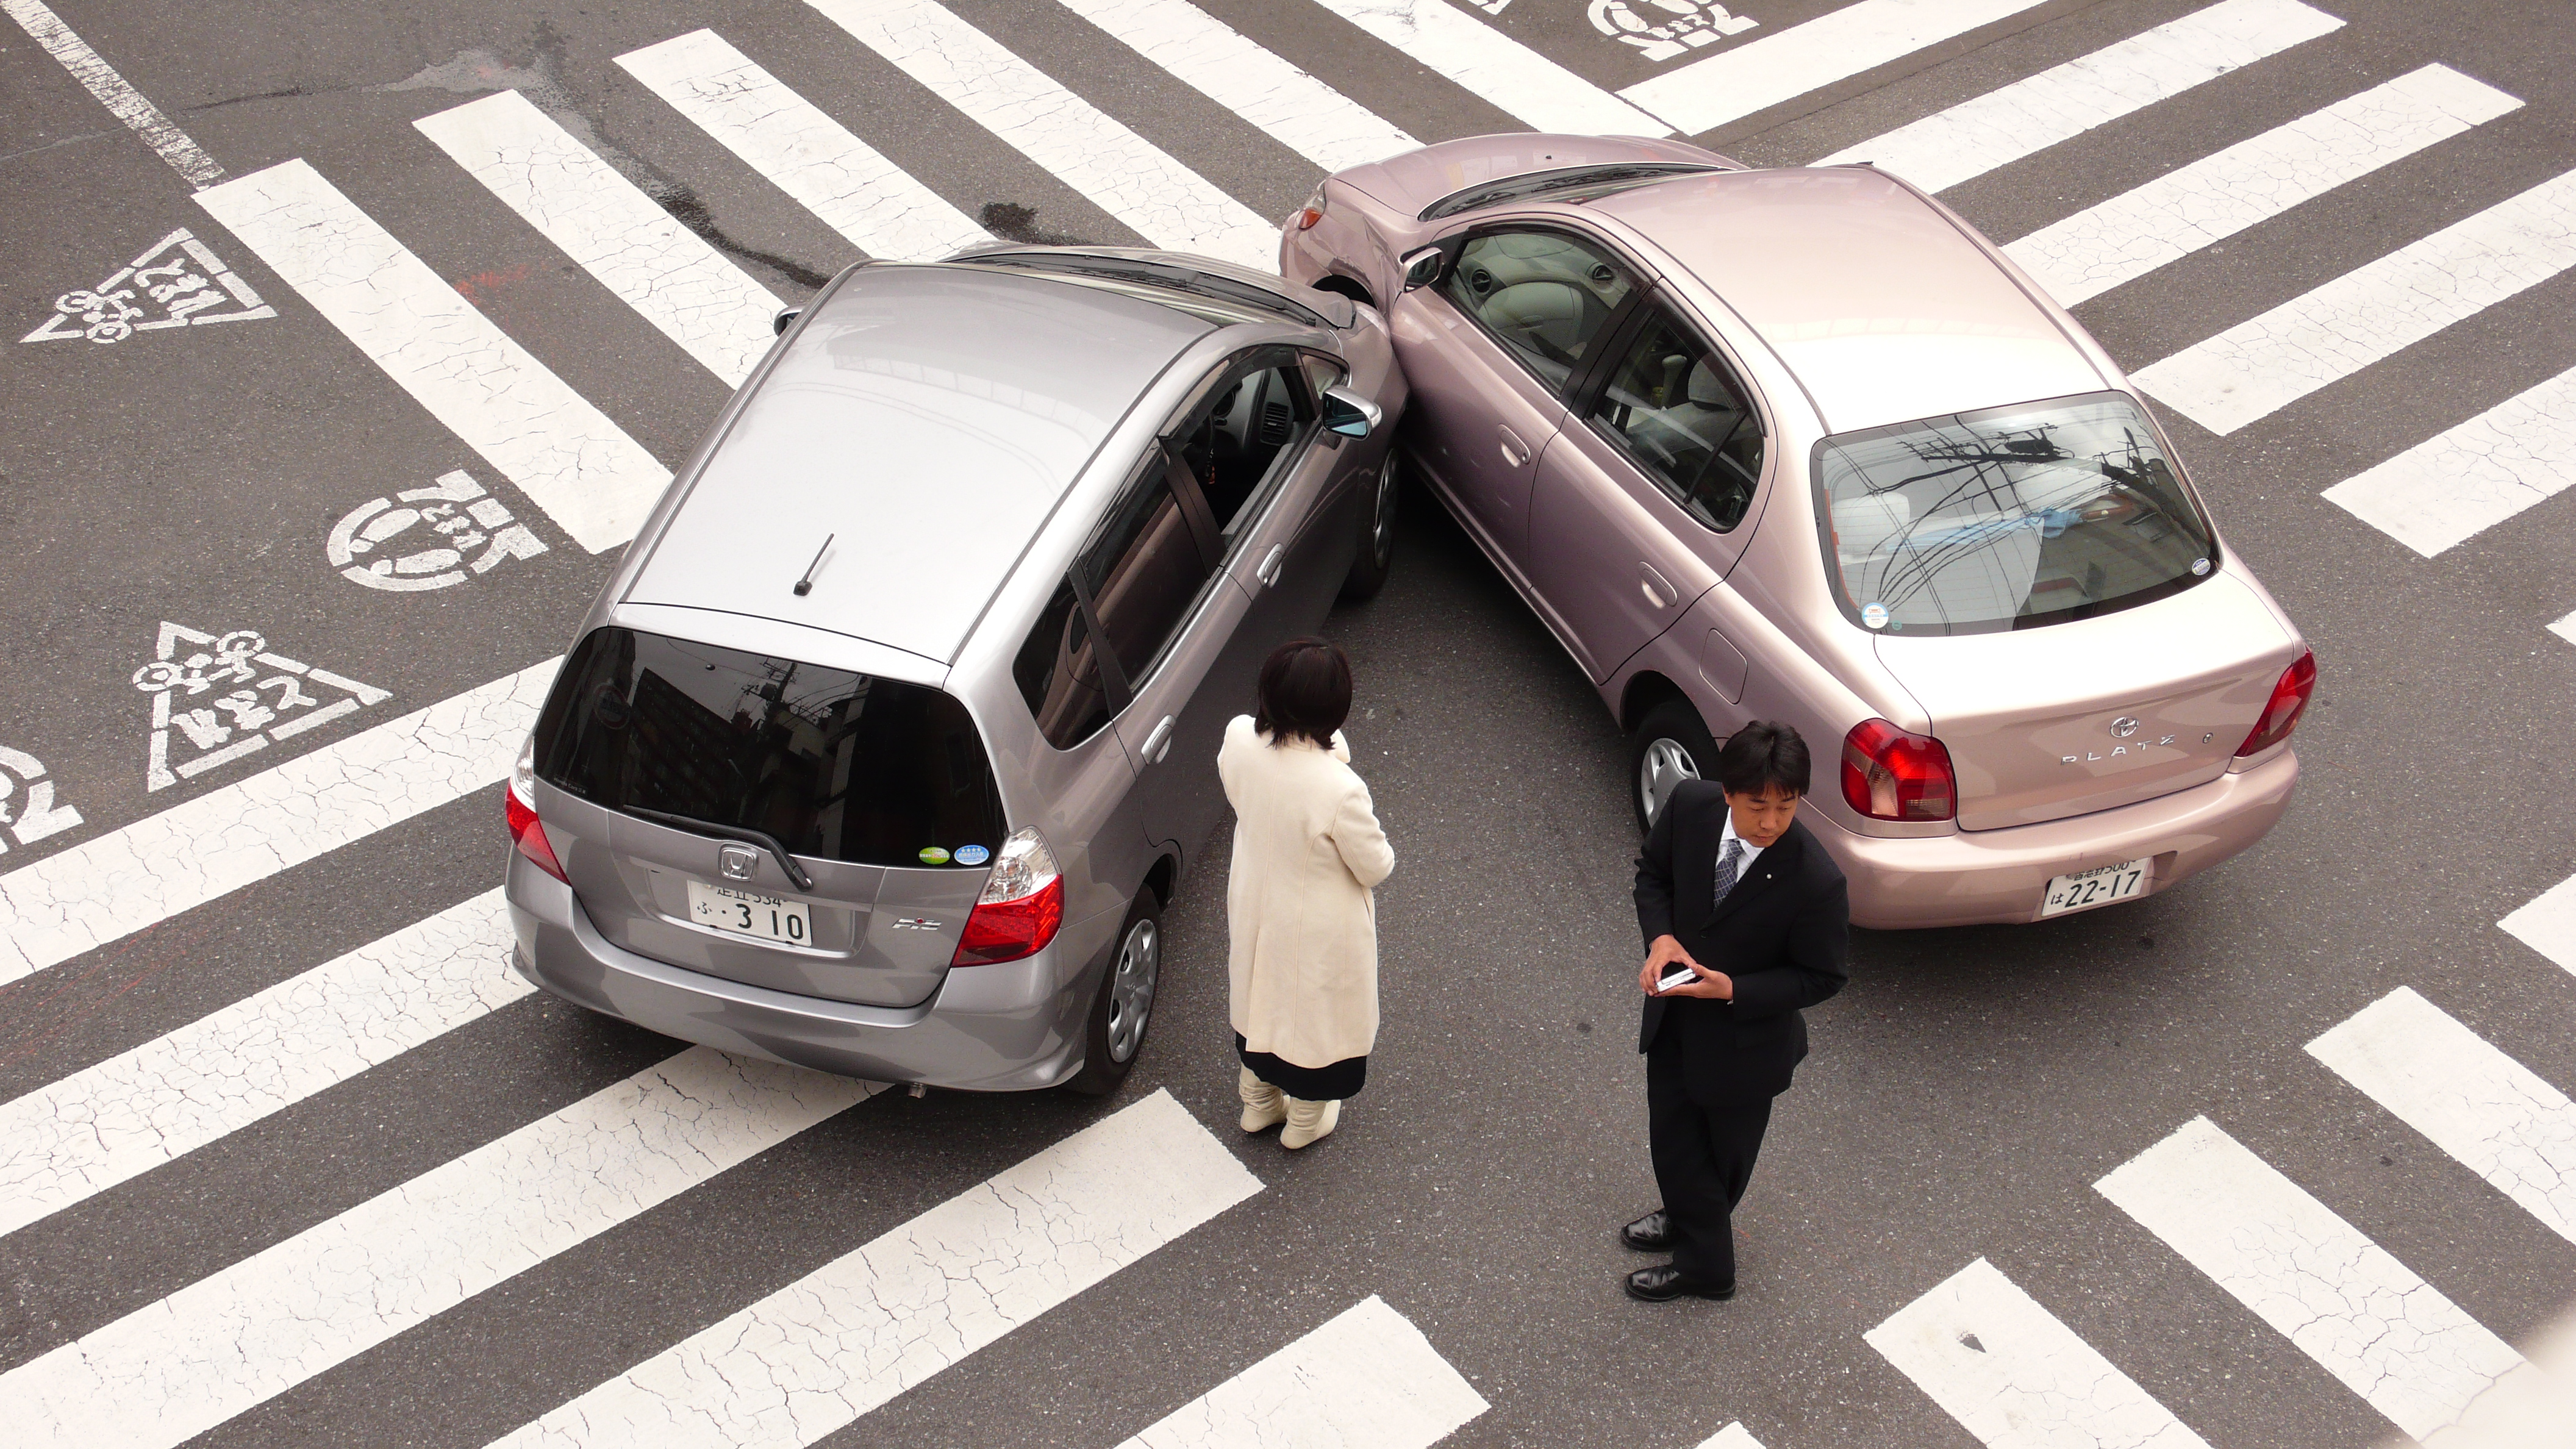 Can a Low Impact Car Accident Cause Serious Injuries?